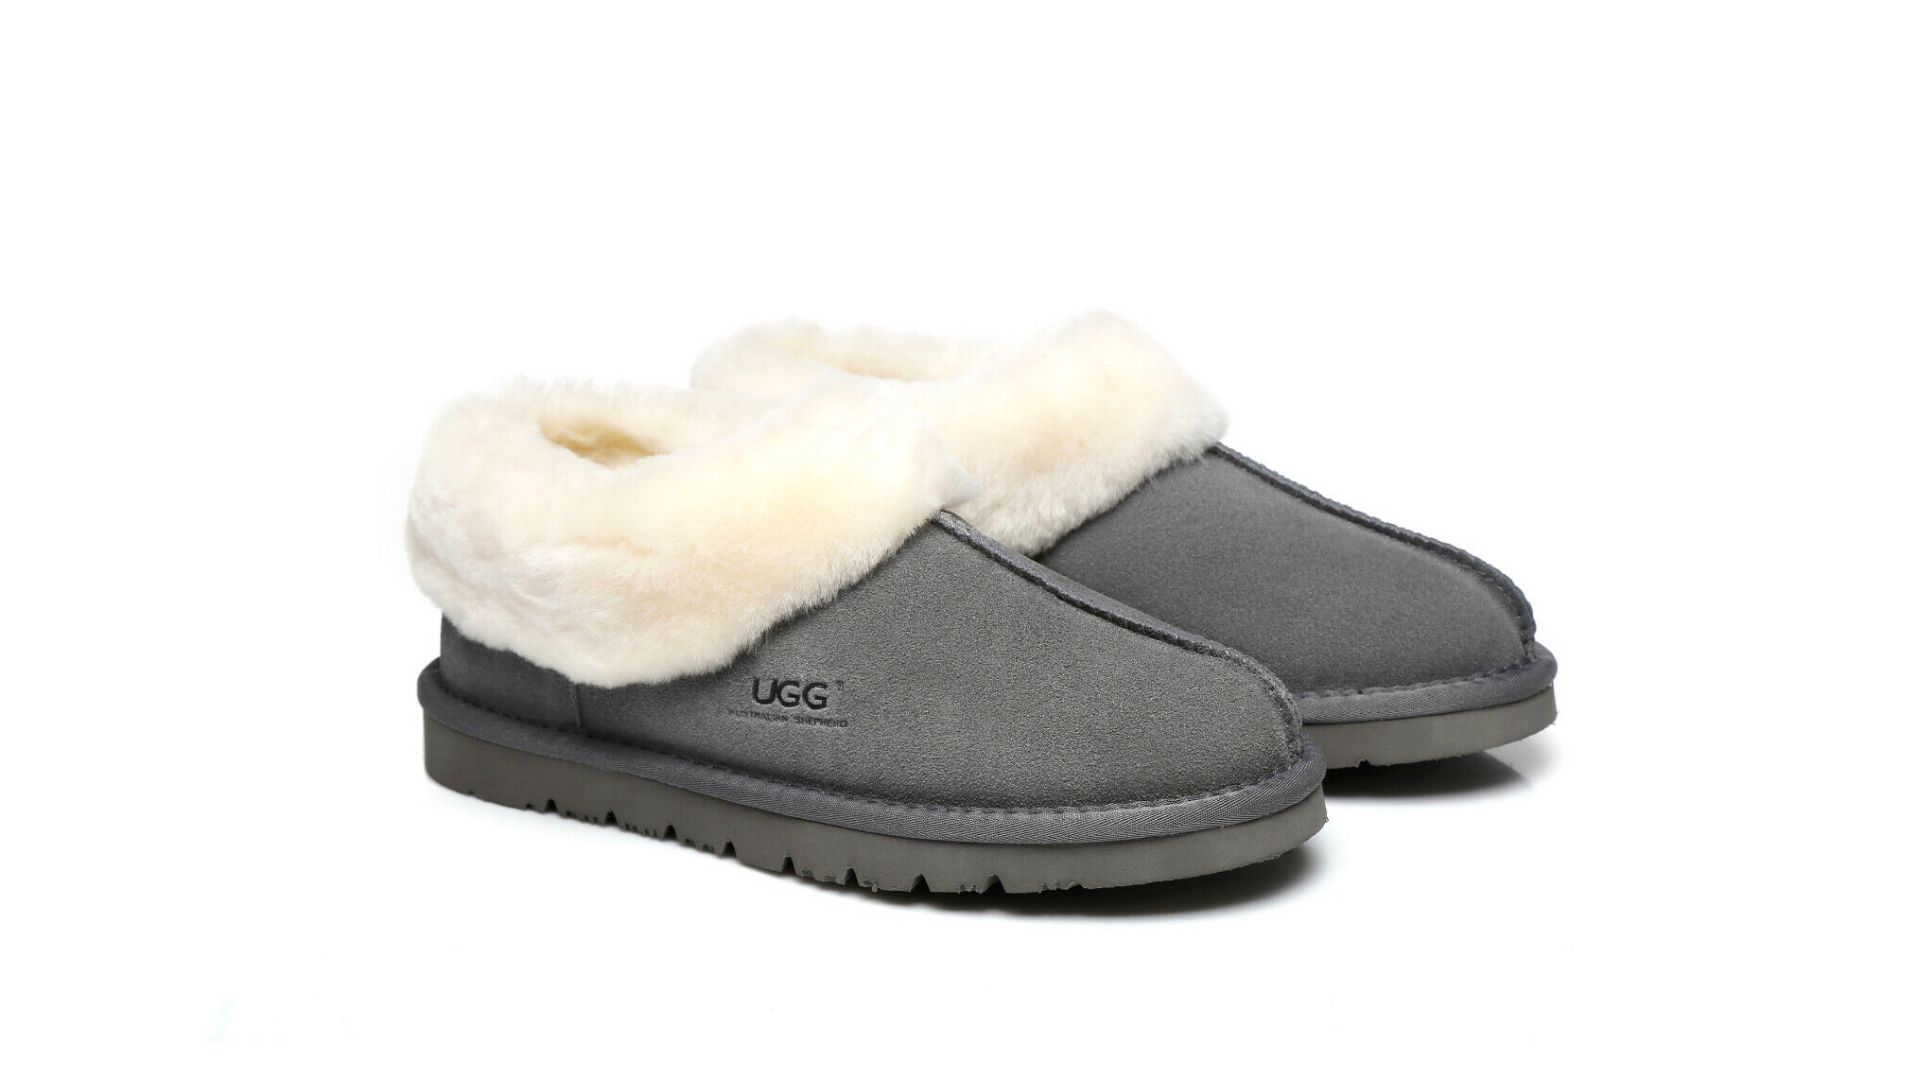 Ugg Boots Are Up To 80% Off RN So Don’t Trip Over Your Ratty Slippers On Yr Way To Checkout